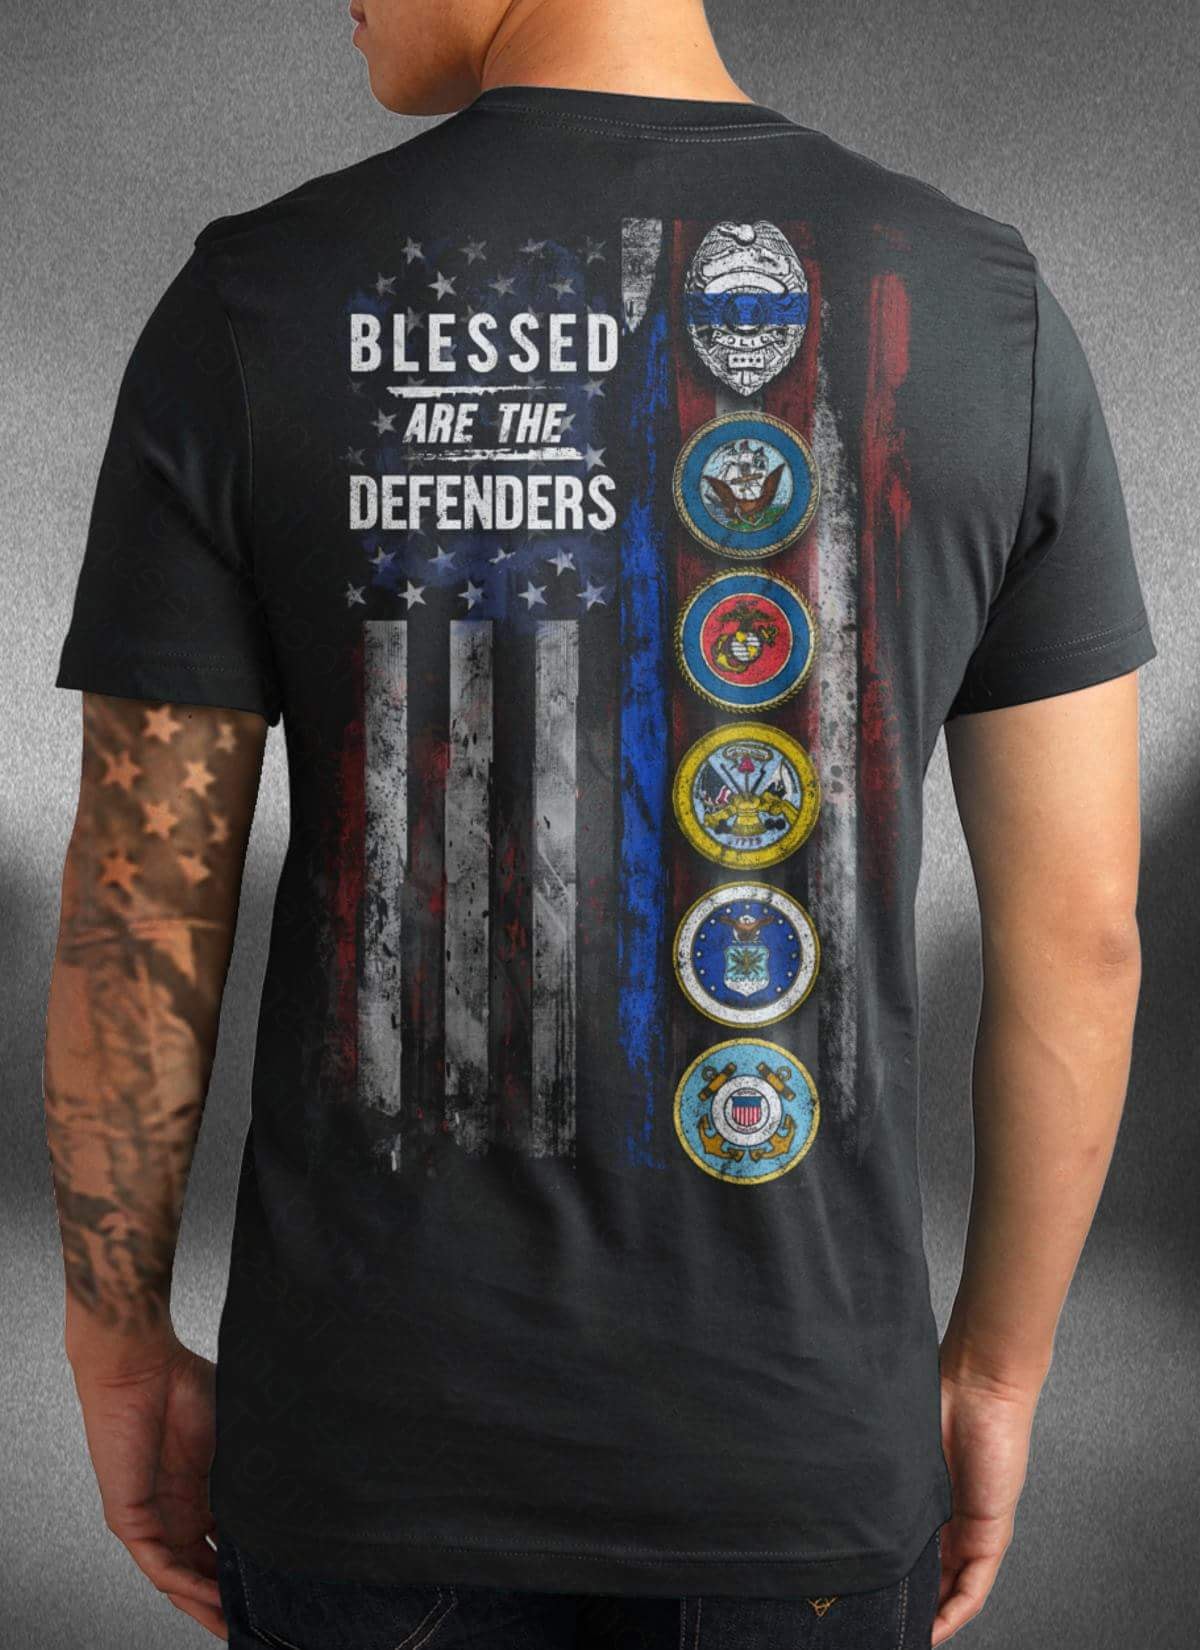 Blessed are the defenders - America flag